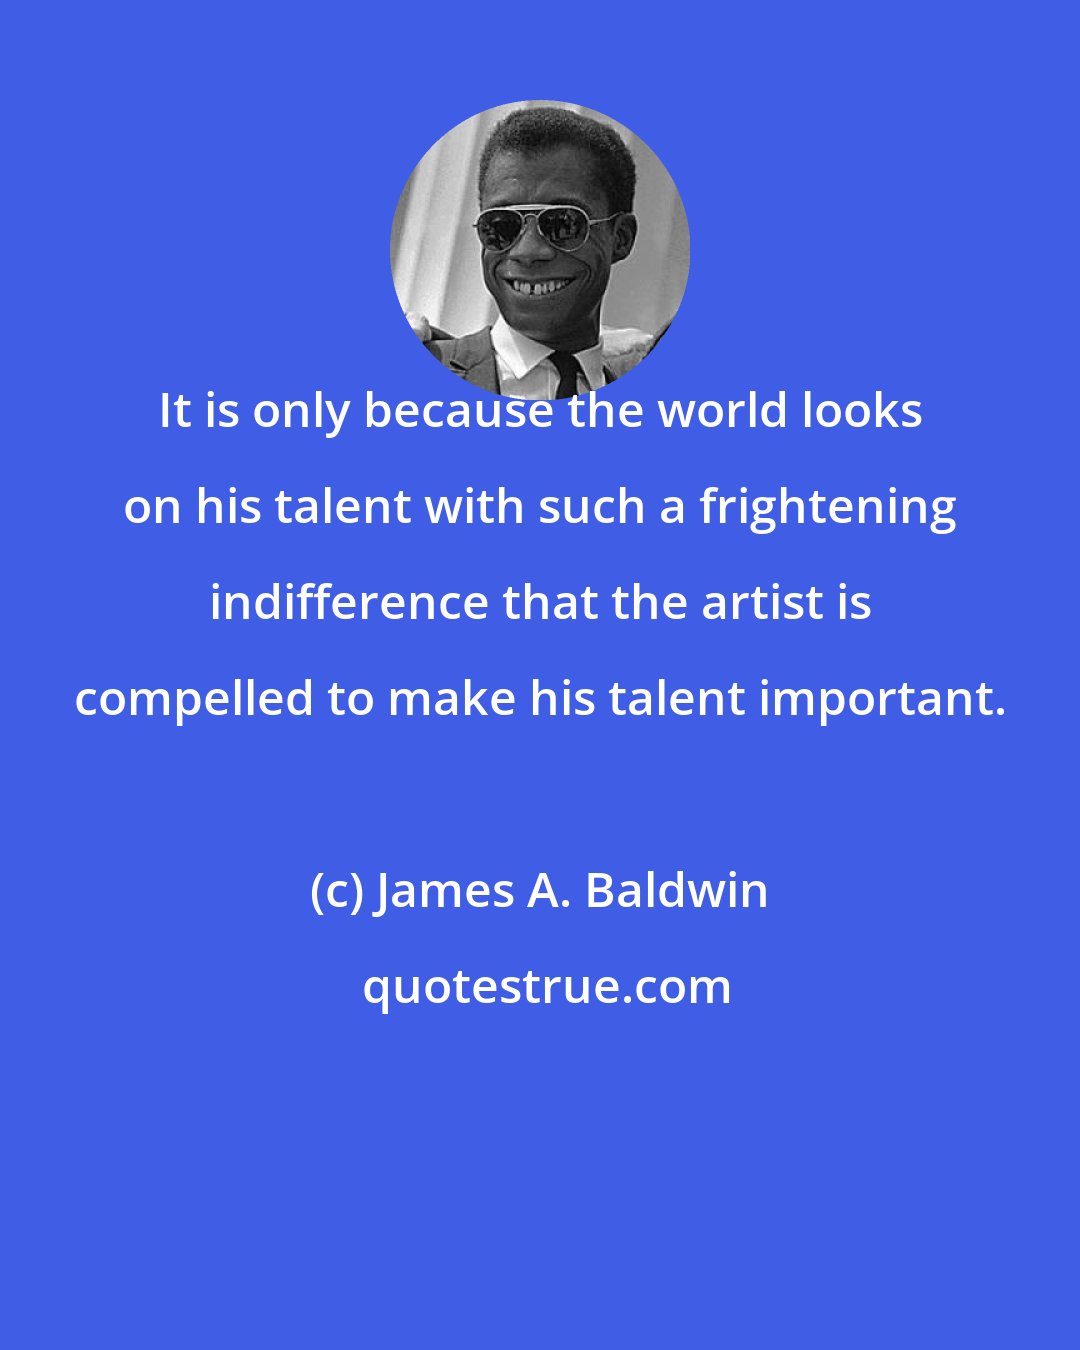 James A. Baldwin: It is only because the world looks on his talent with such a frightening indifference that the artist is compelled to make his talent important.